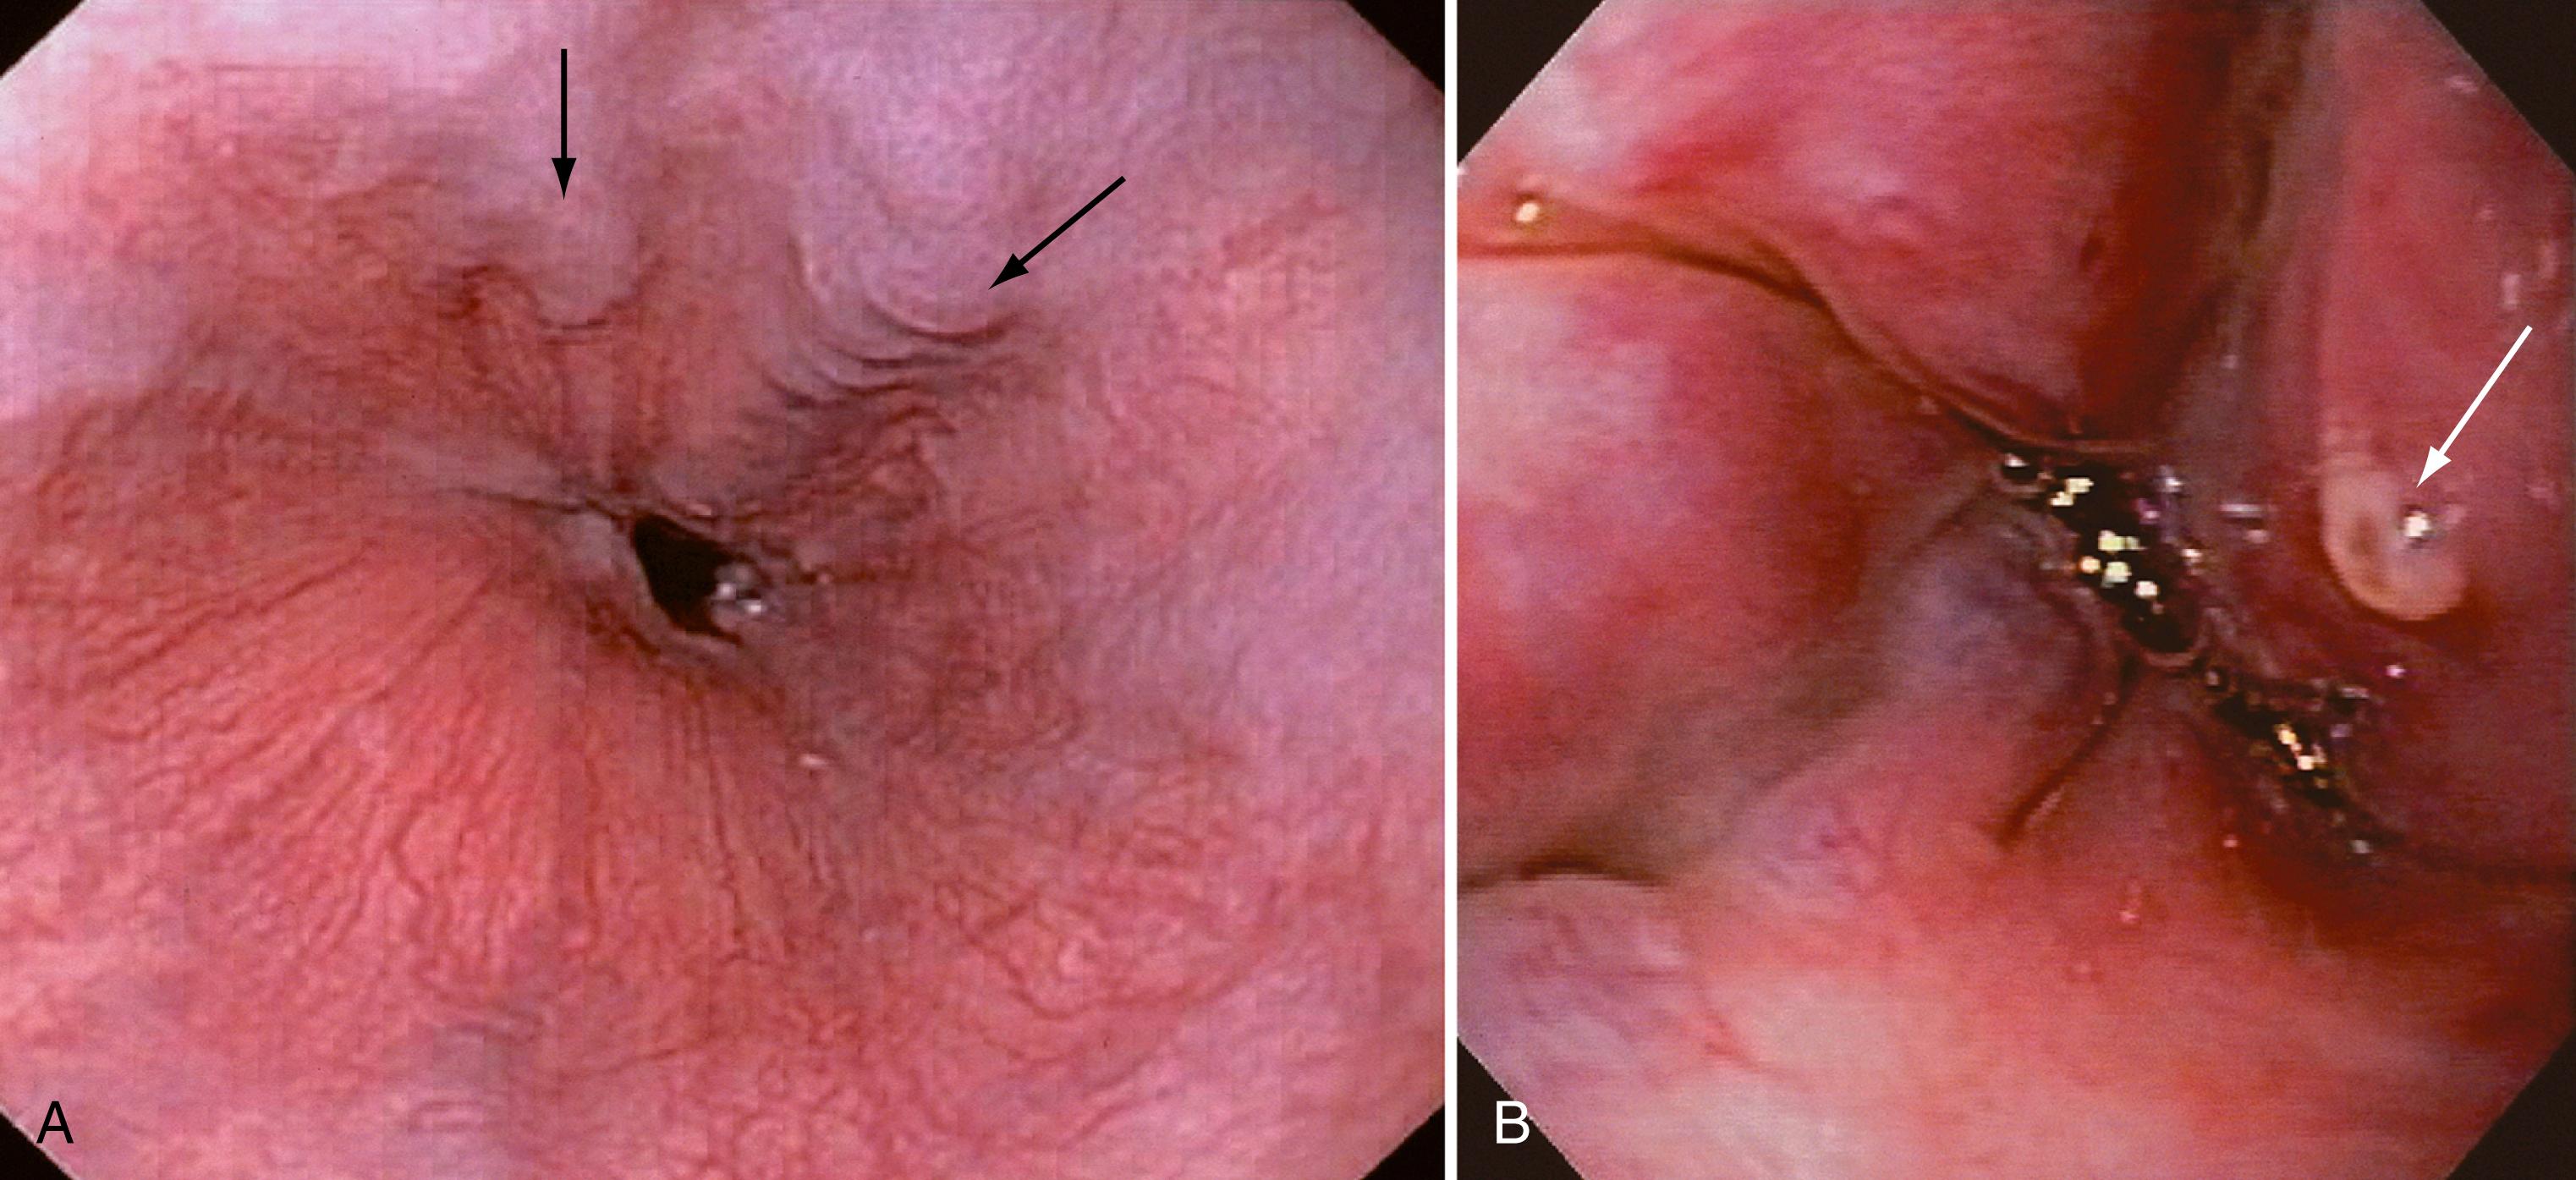 Fig. 92.6, Endoscopic appearances of esophageal varices. A, EGD demonstrating dilated and straight veins (small esophageal varices) in the distal esophagus (arrows) . B, EGD demonstrating large esophageal varices, greater than 5 mm in diameter, with a fibrin plug (arrow) indicating the site of a recent bleed.